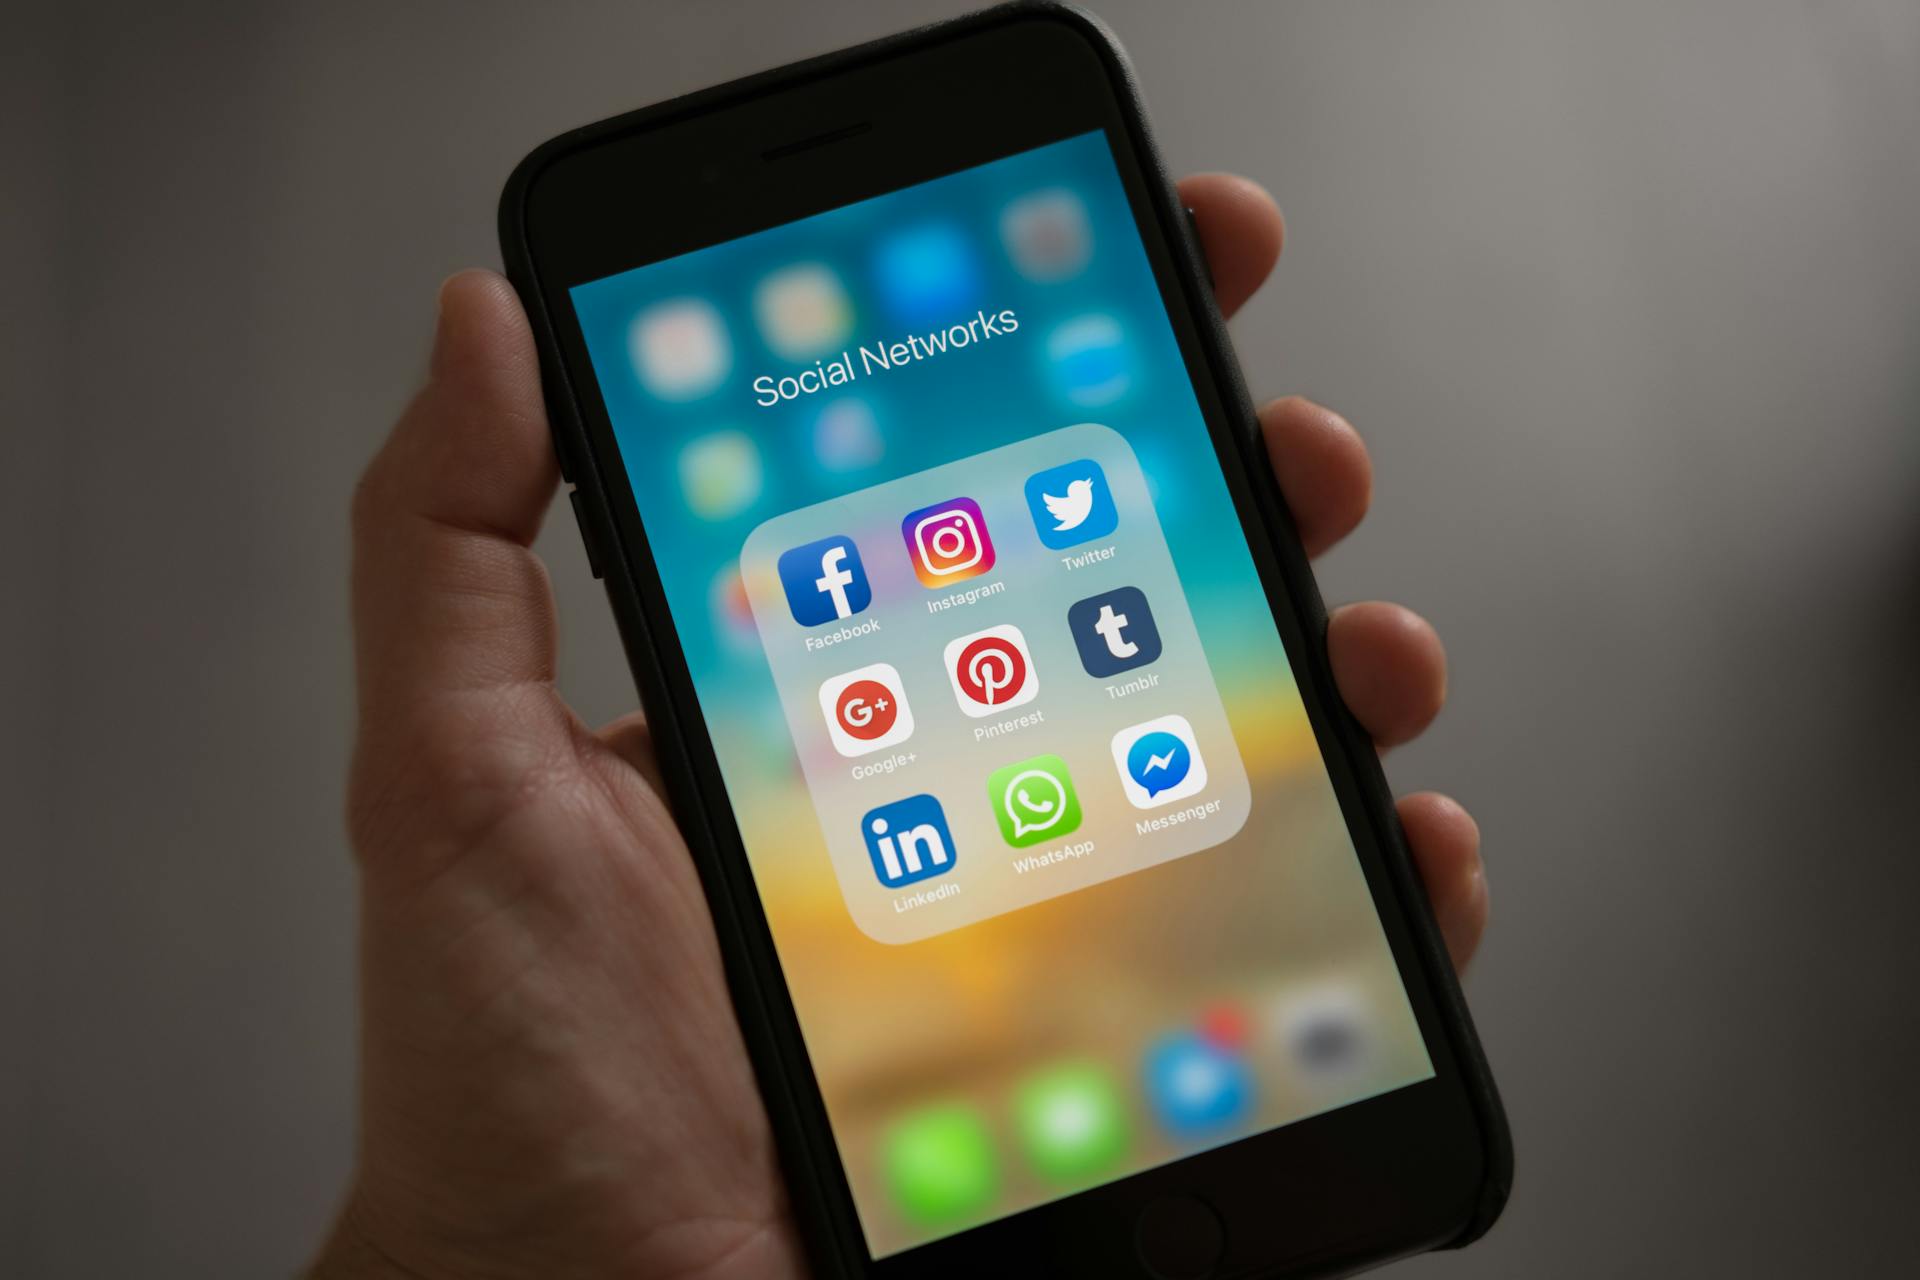 A phone opened to social media | Source: Pexels